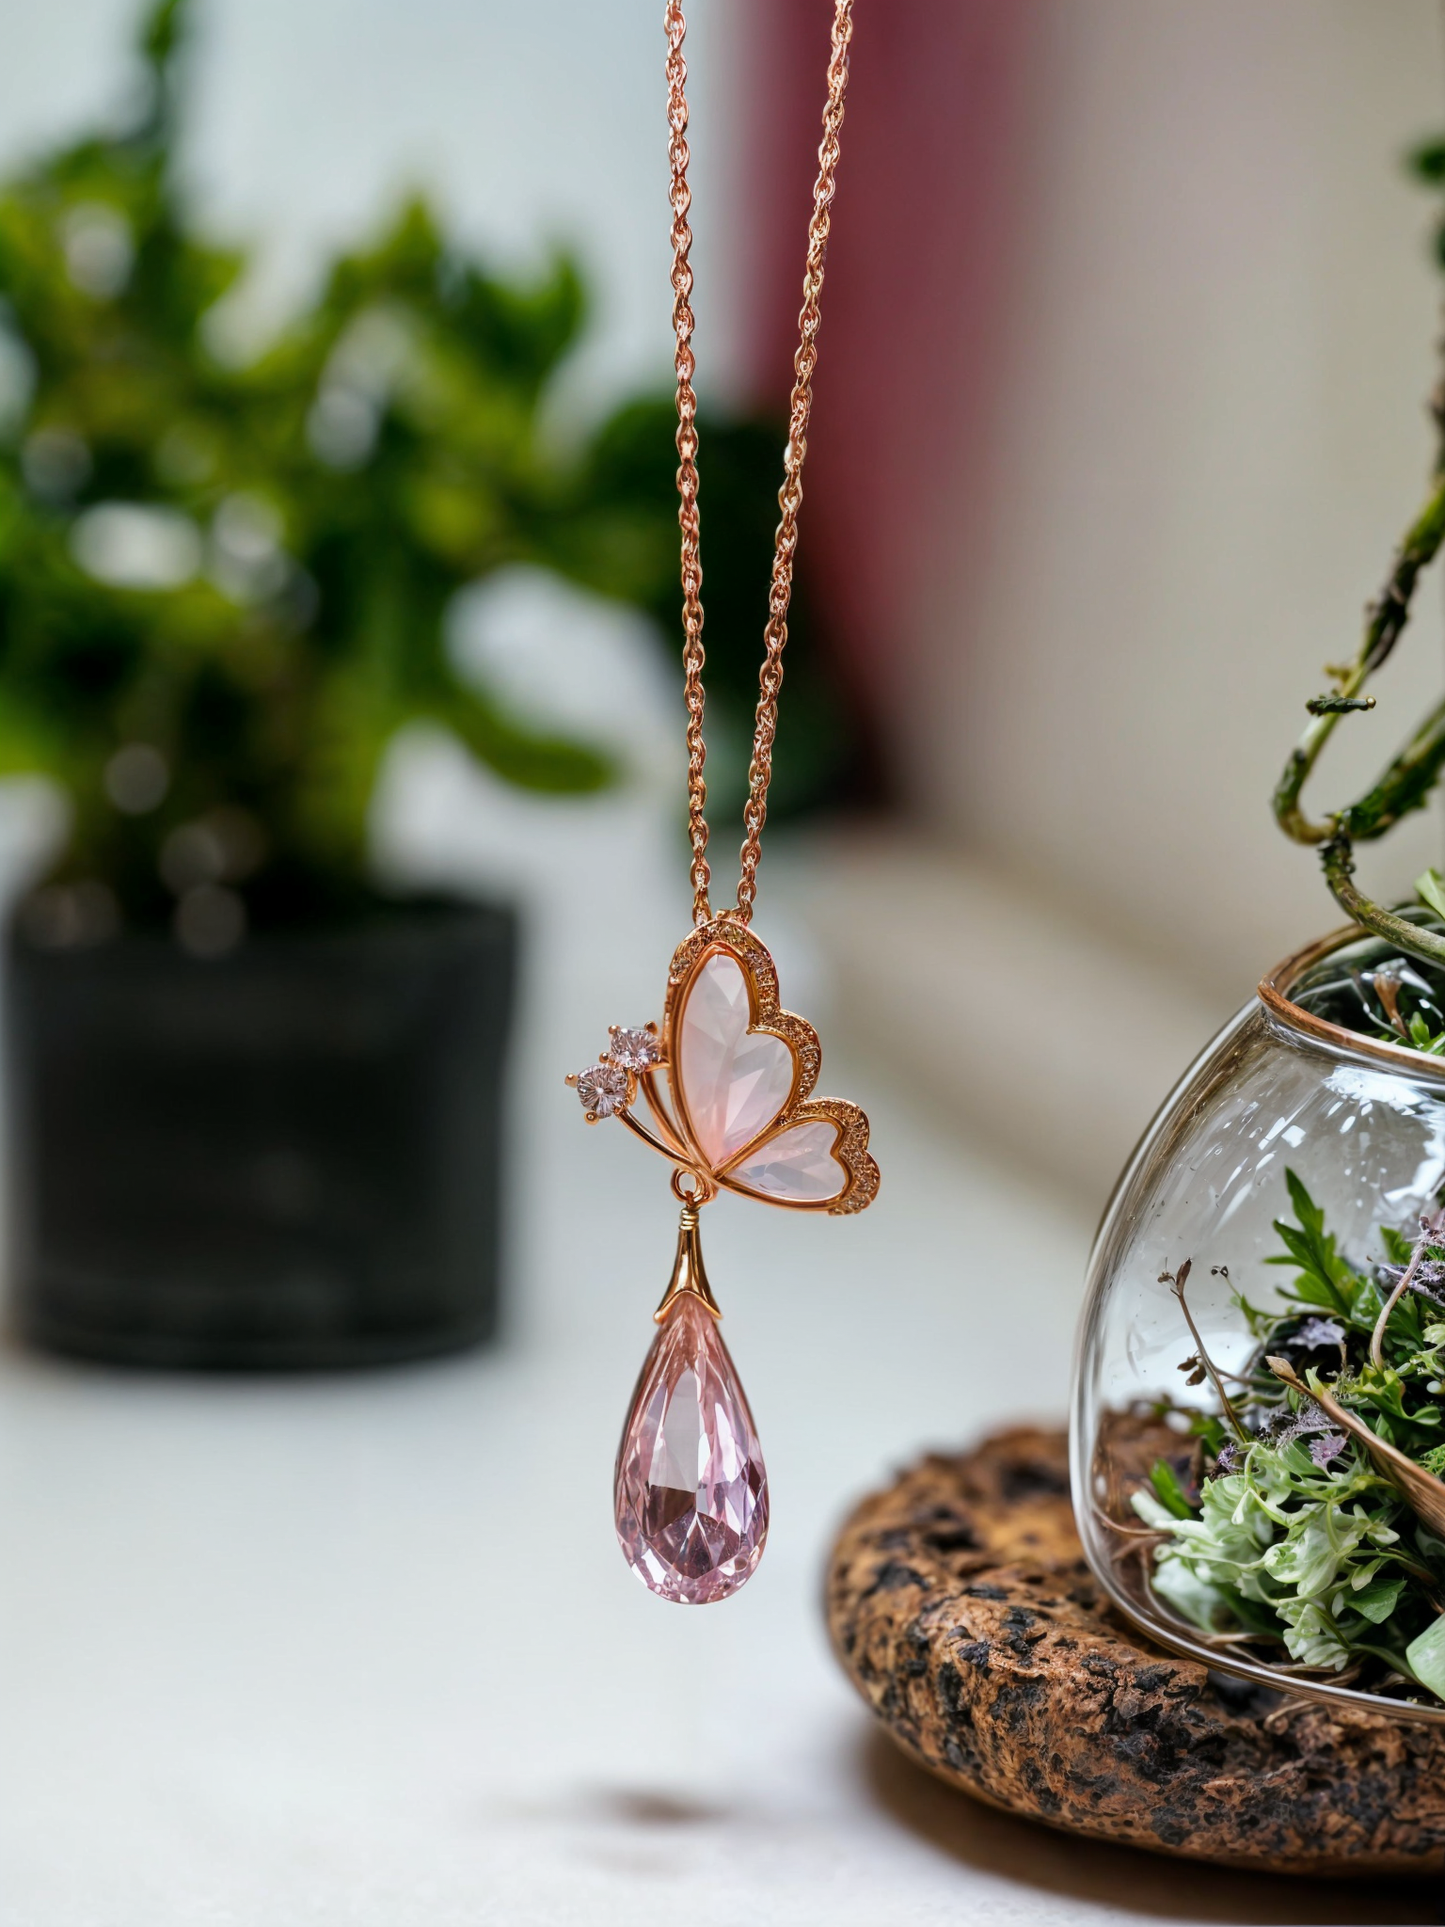 Butterfly Pendant with Pink Drop Stone